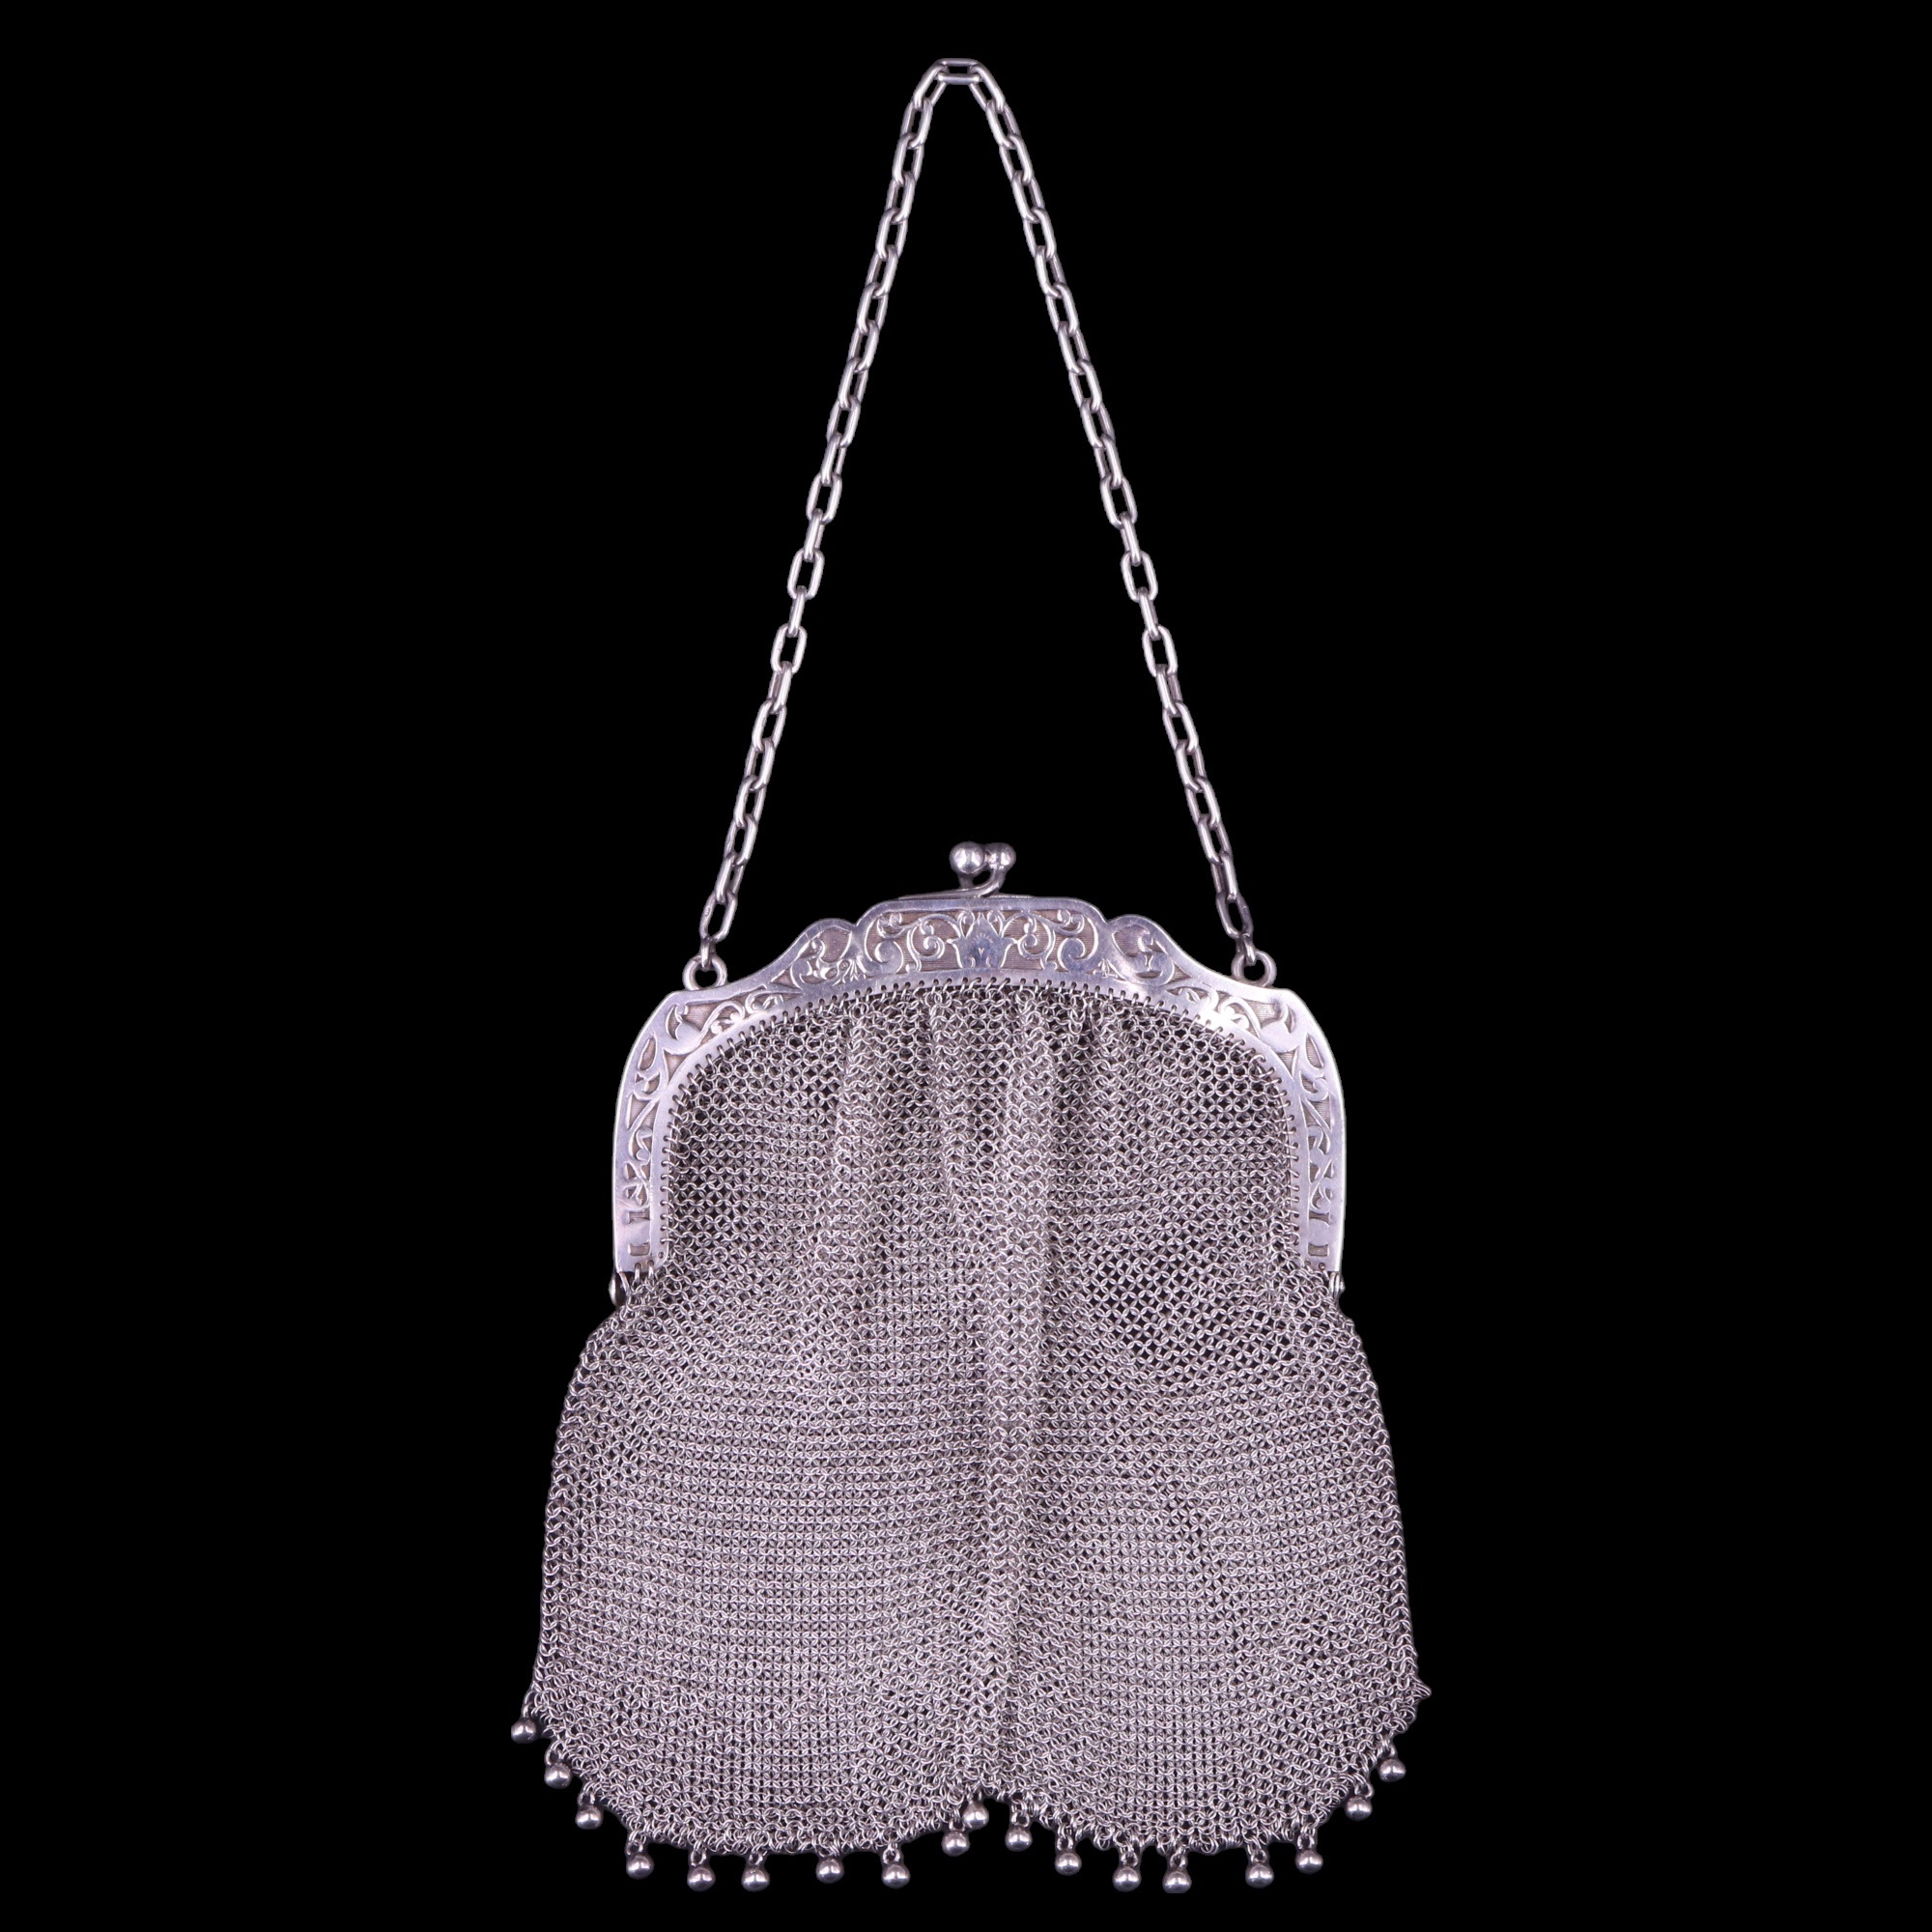 An early 20th Century European silver mesh evening bag, apparent Paris Foreign Silver Small Articles